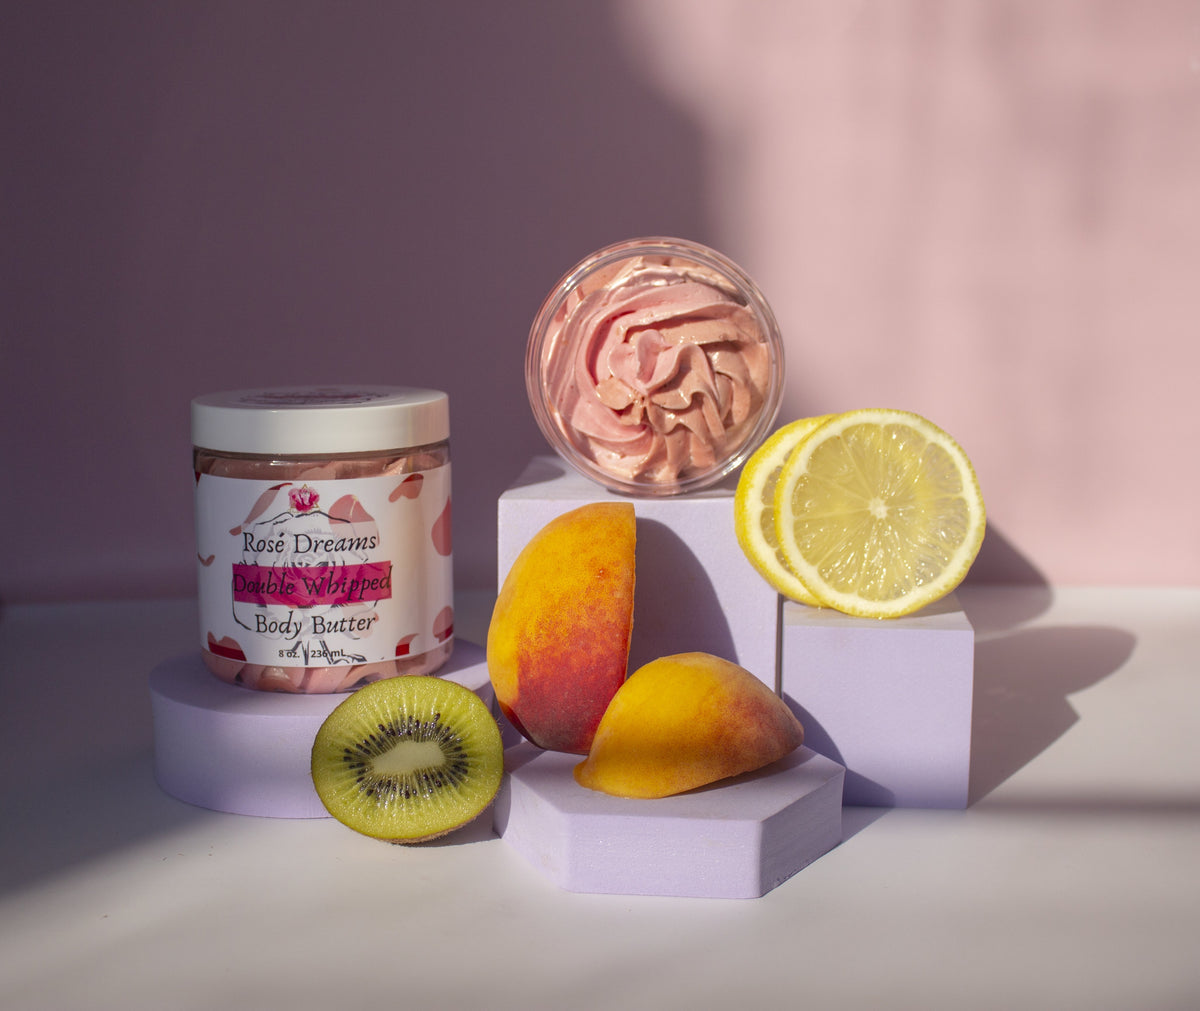 Rose Dreams Body Butter with Pink Background and Fruits